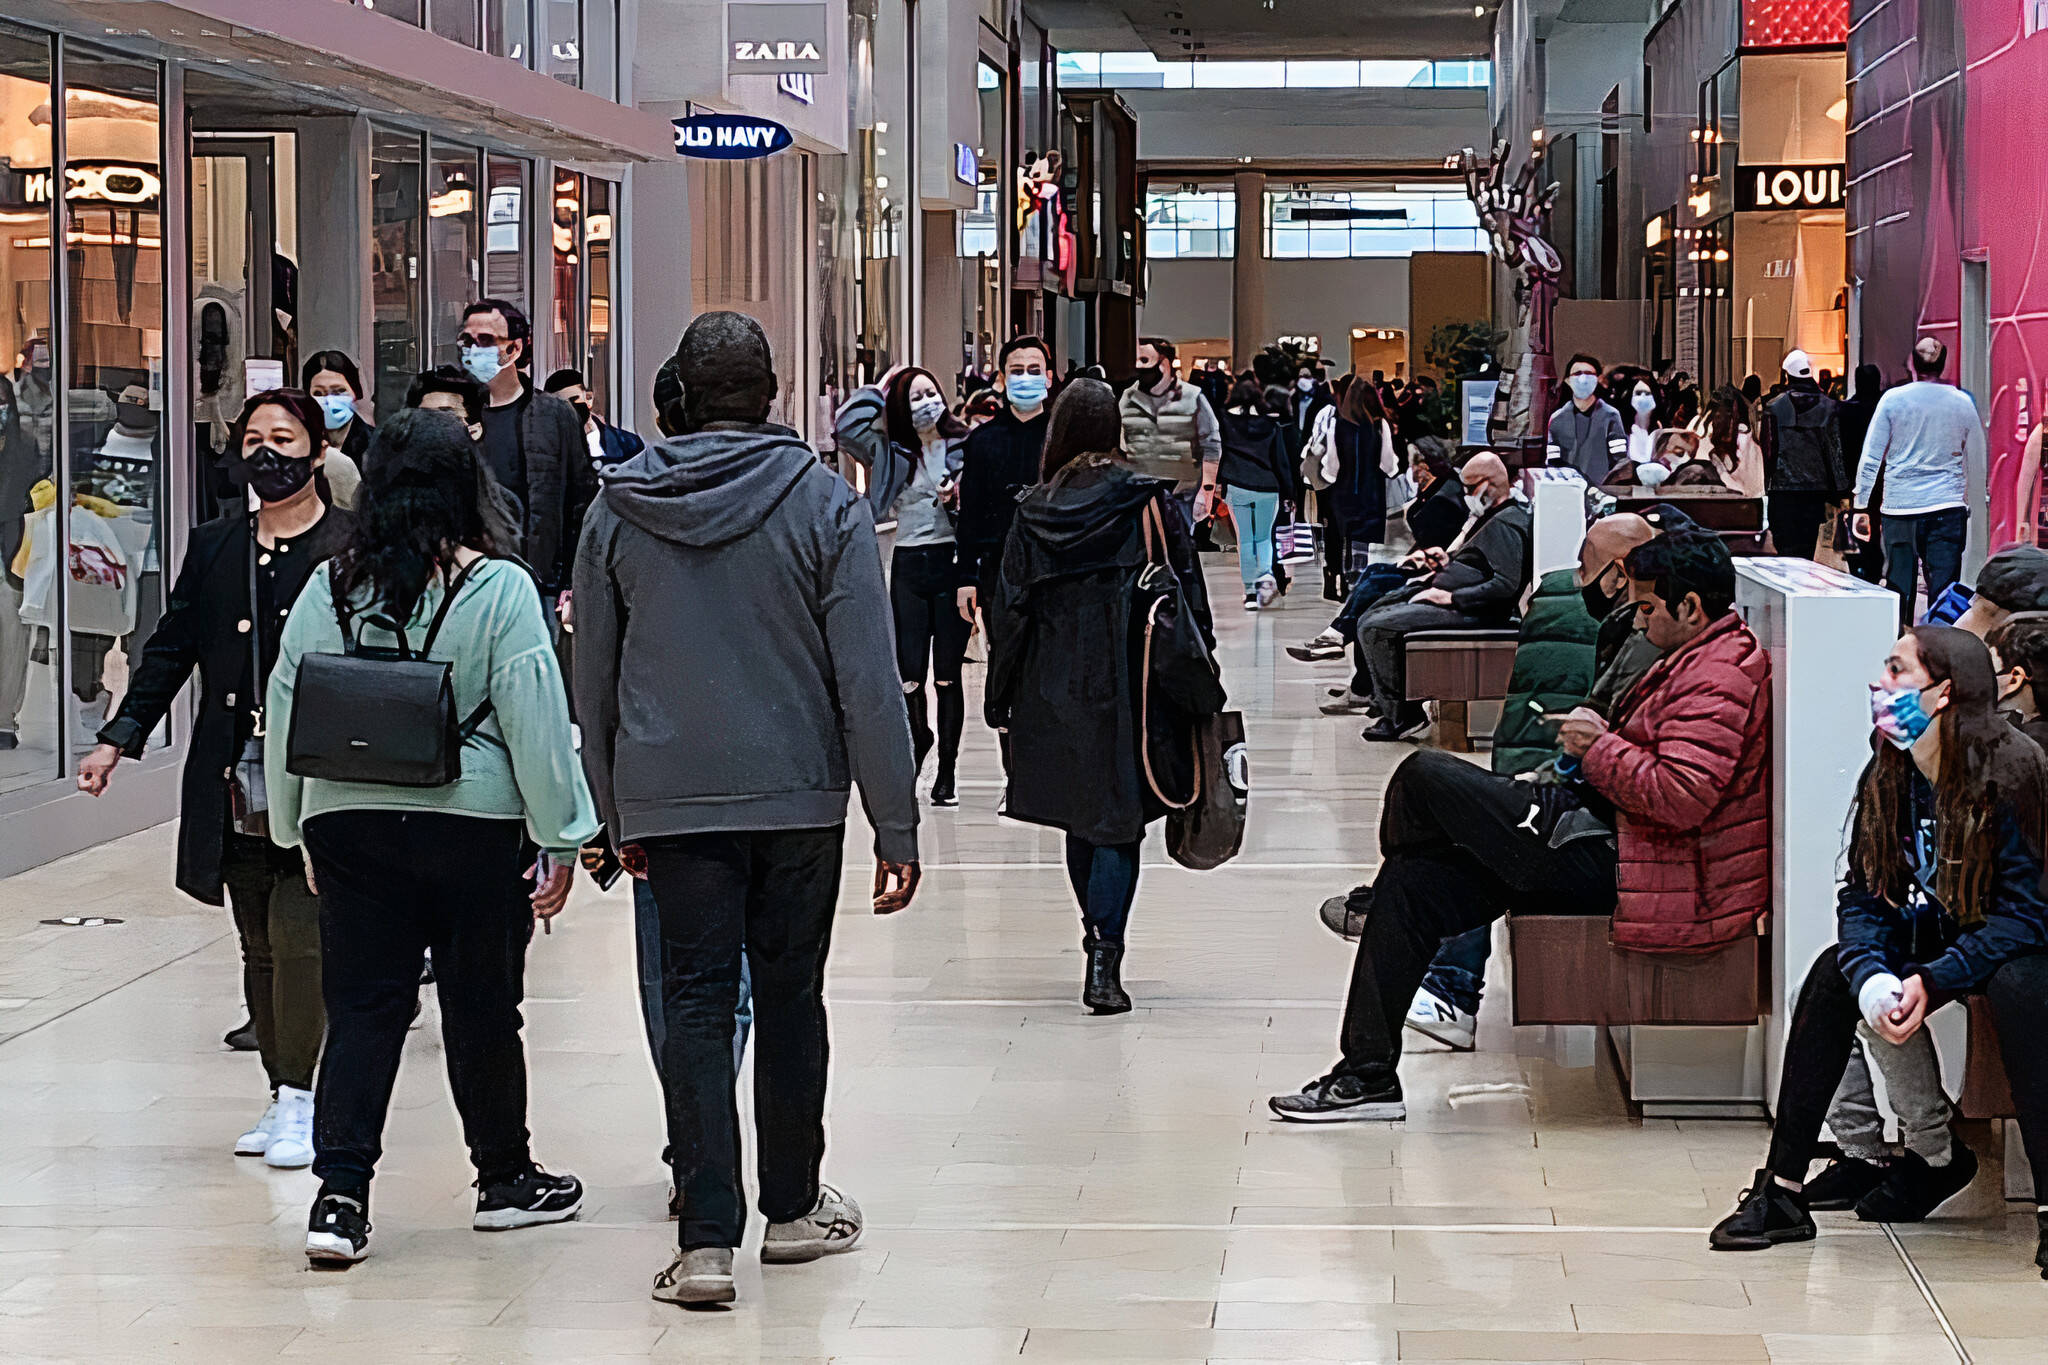 Sales associate jobs at yorkdale mall